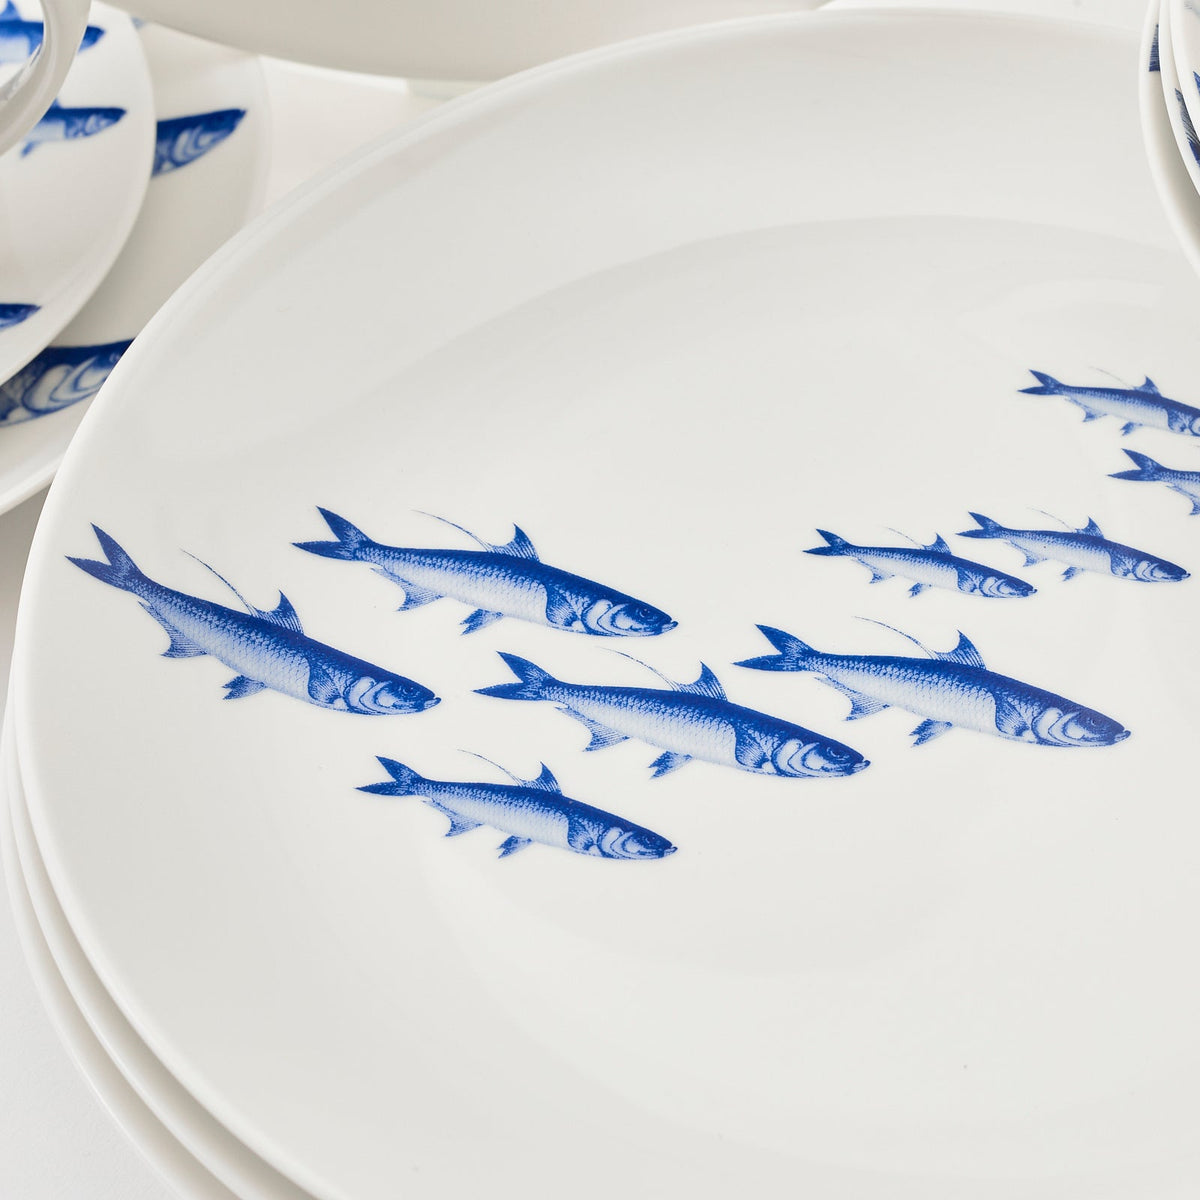 A 16 piece set of blue and white plates with fish on them, the School of Fish Table for 4 by Caskata.